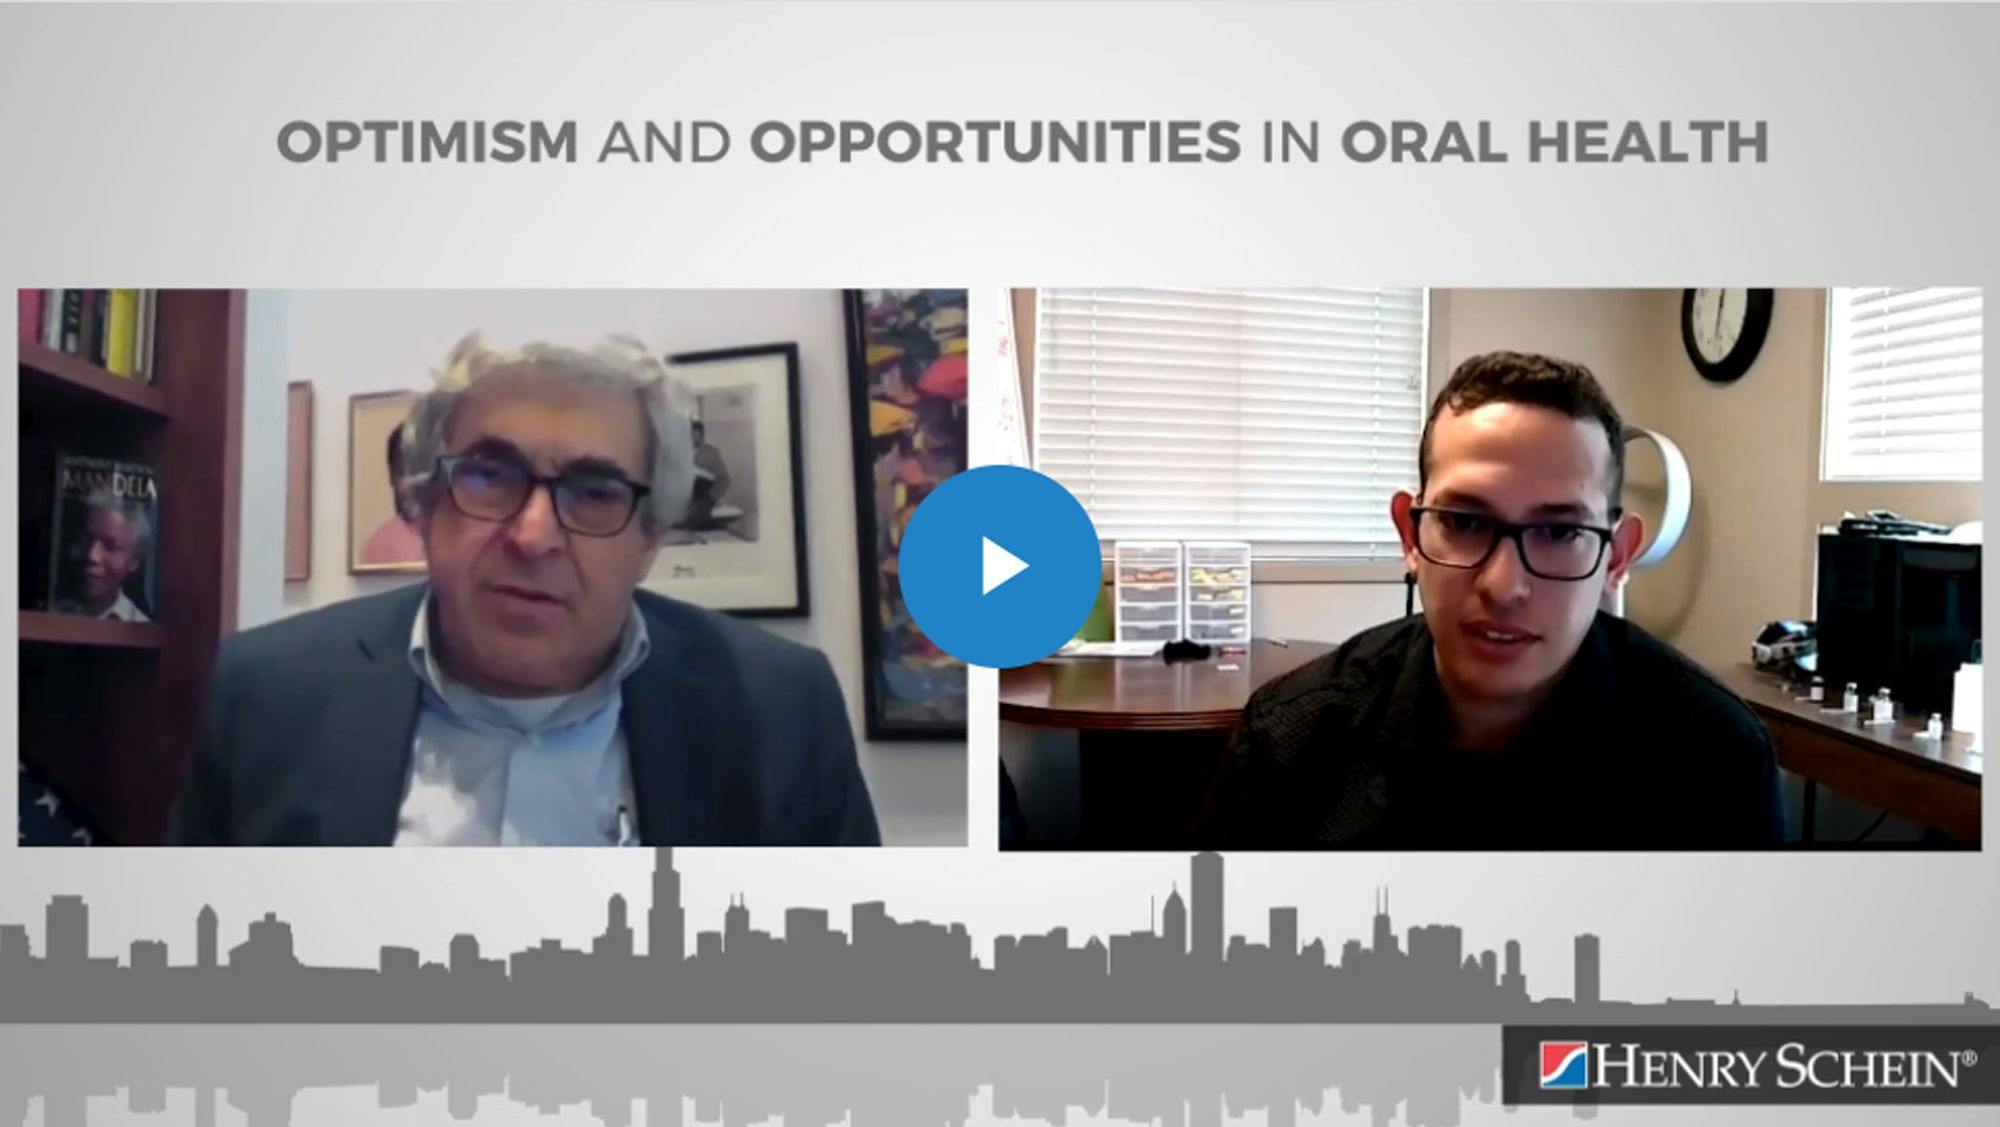 Henry Schein Announces Launch of “Optimism and Opportunities in Oral Health” Virtual Program